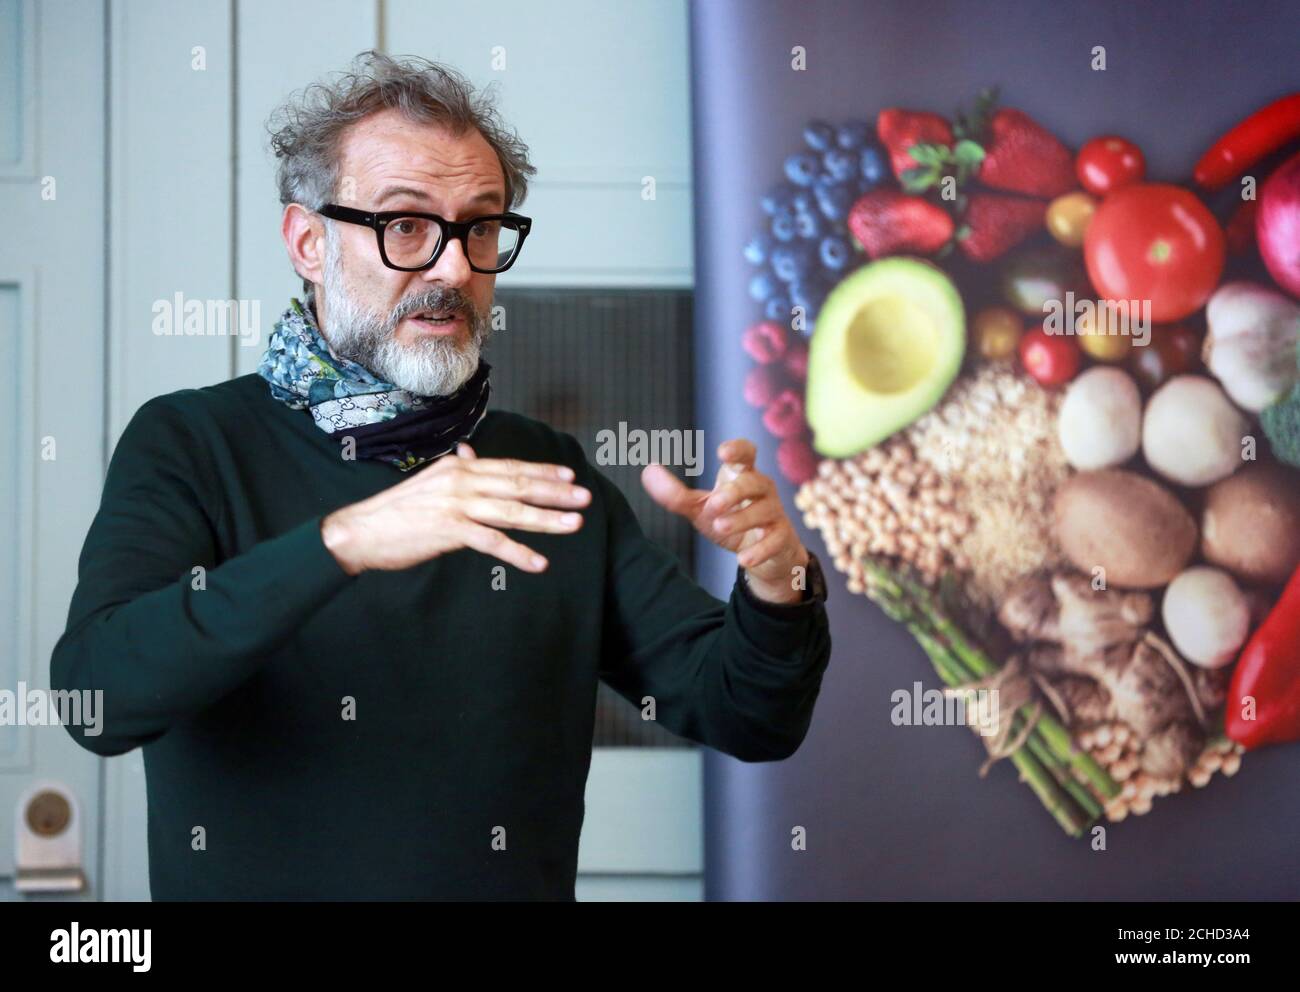 Chef Massimo Bottura hosts an event with Grundig to celebrate the new partnership of his charity Food For Soul, a non-profit organization to promote social awareness about food wastage and hunger, and the home appliance brand, Earls Court, London. Stock Photo